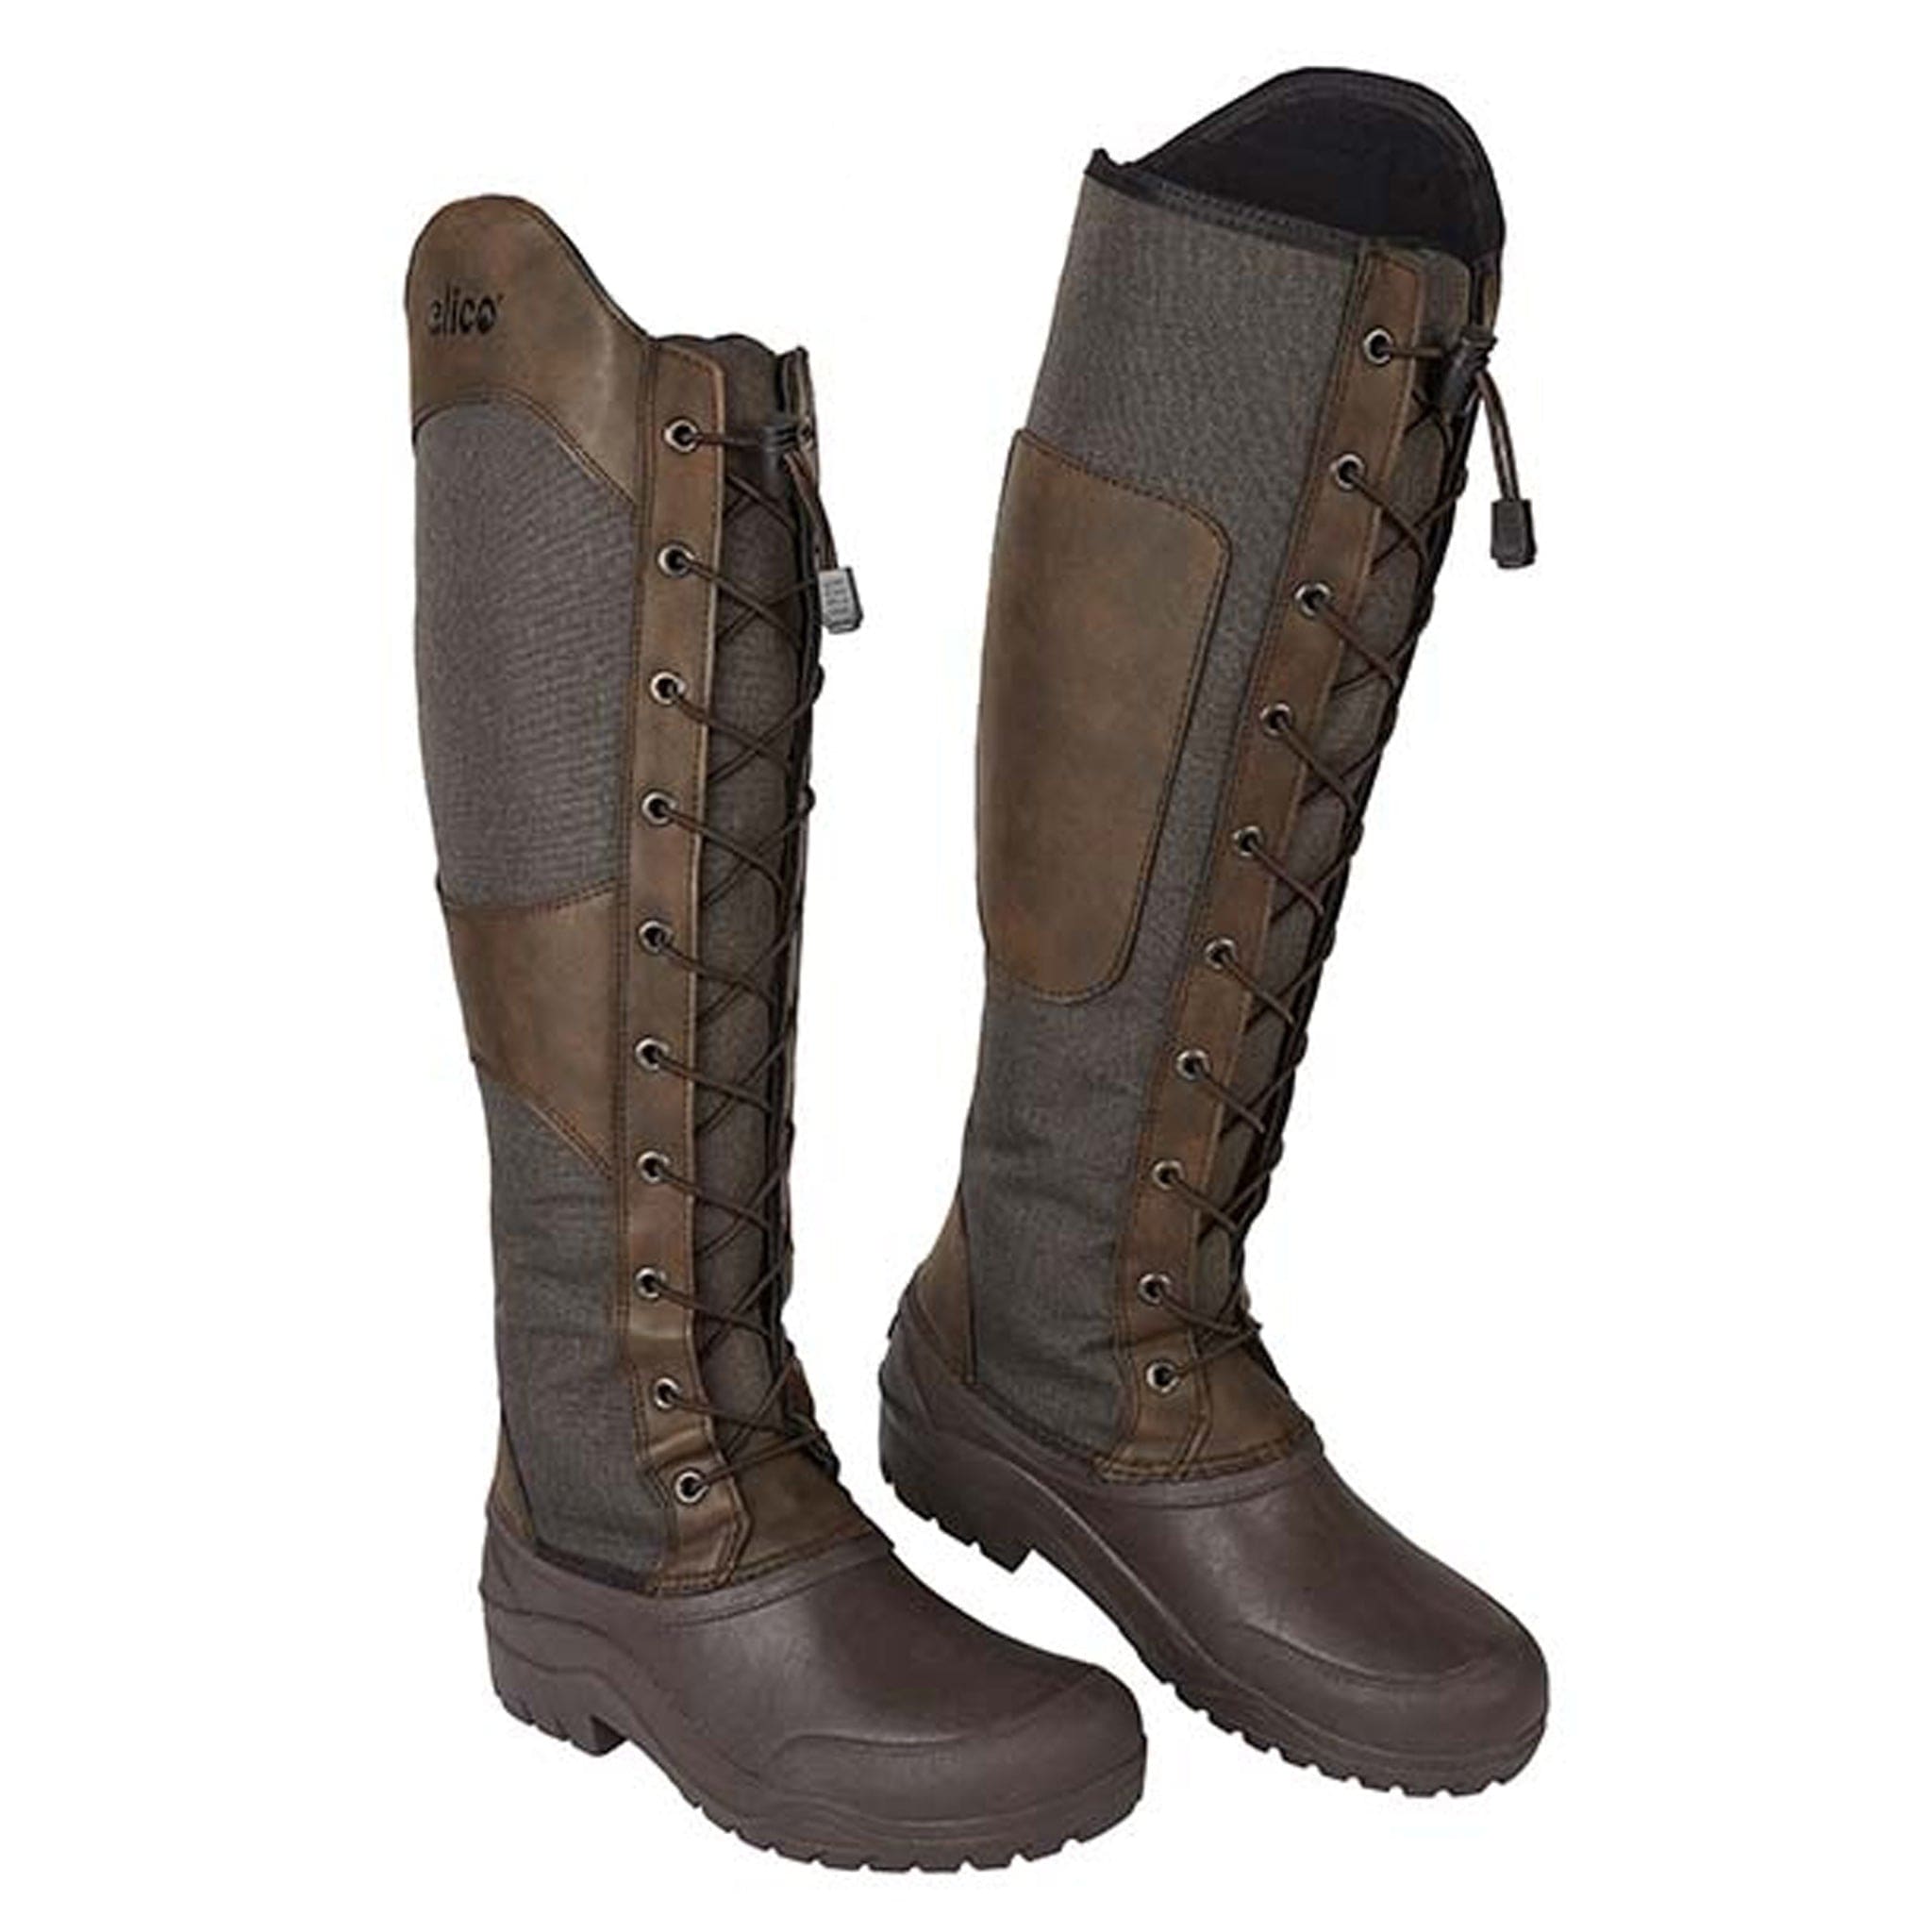 Elico Chalgrove Long Boots BOCHAL37 Brown Pair Lace Up